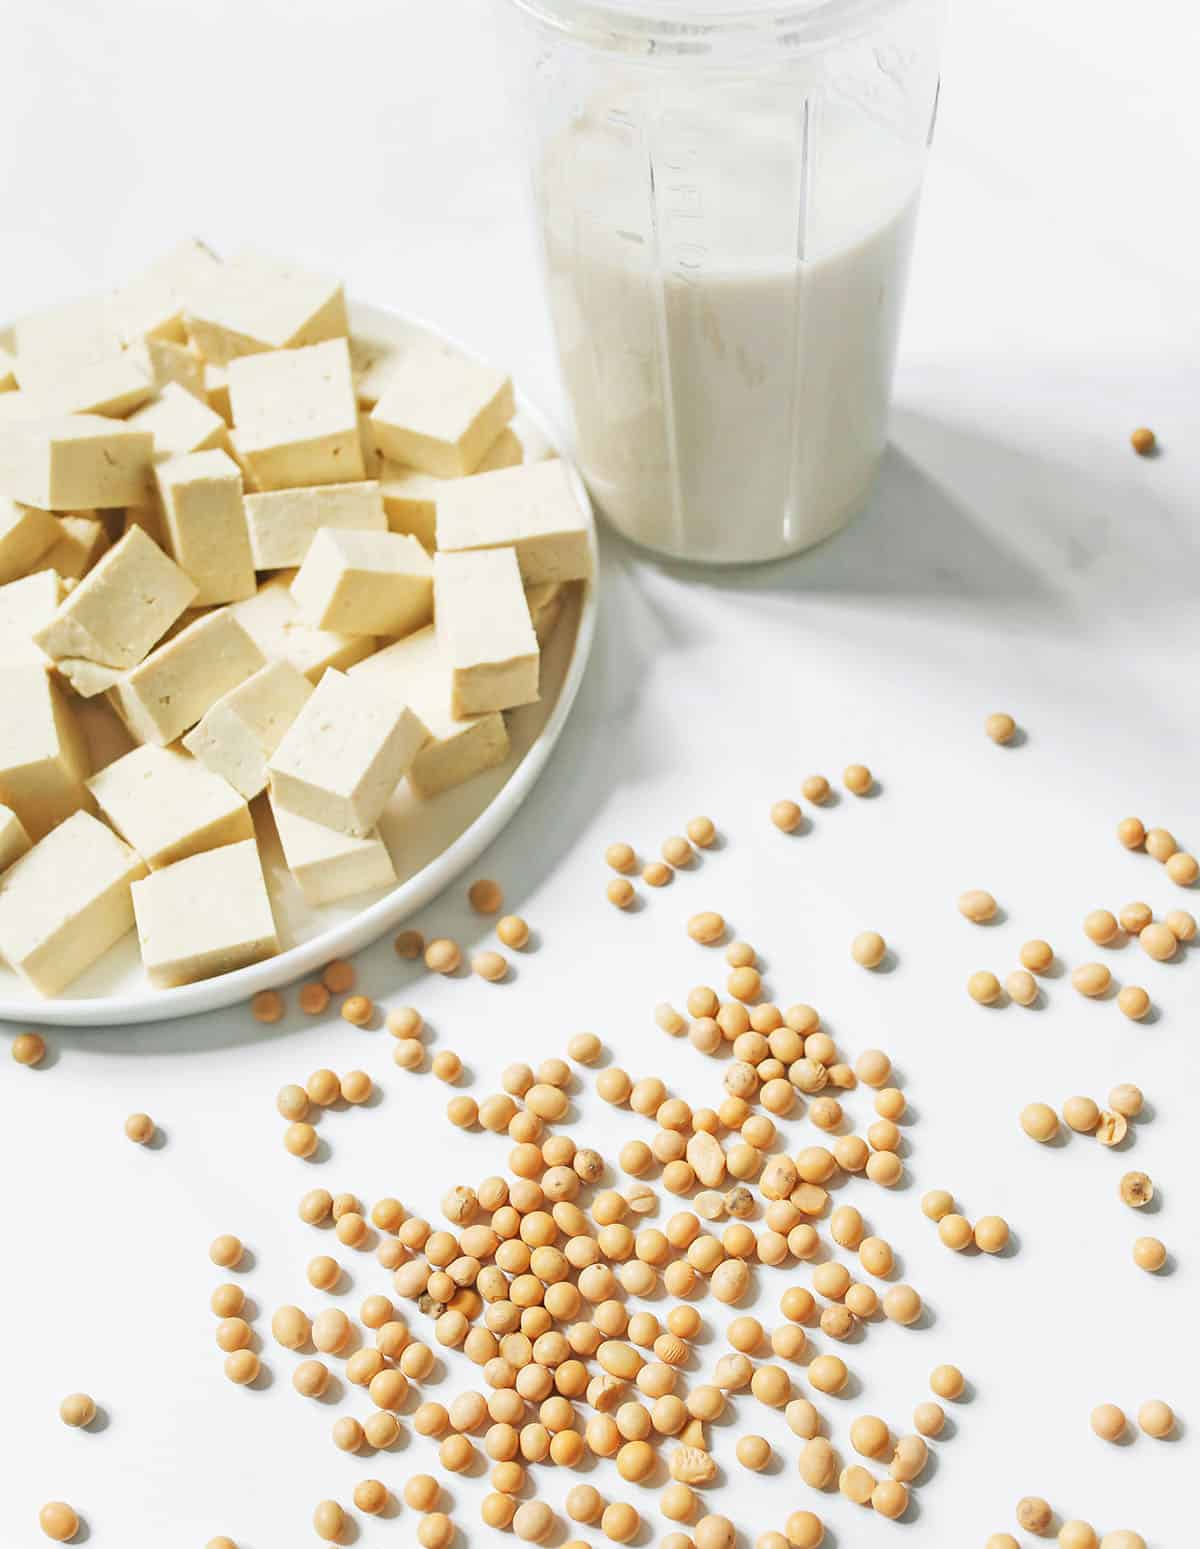 uncooked tofu, soy milk, and soy beans on a white background